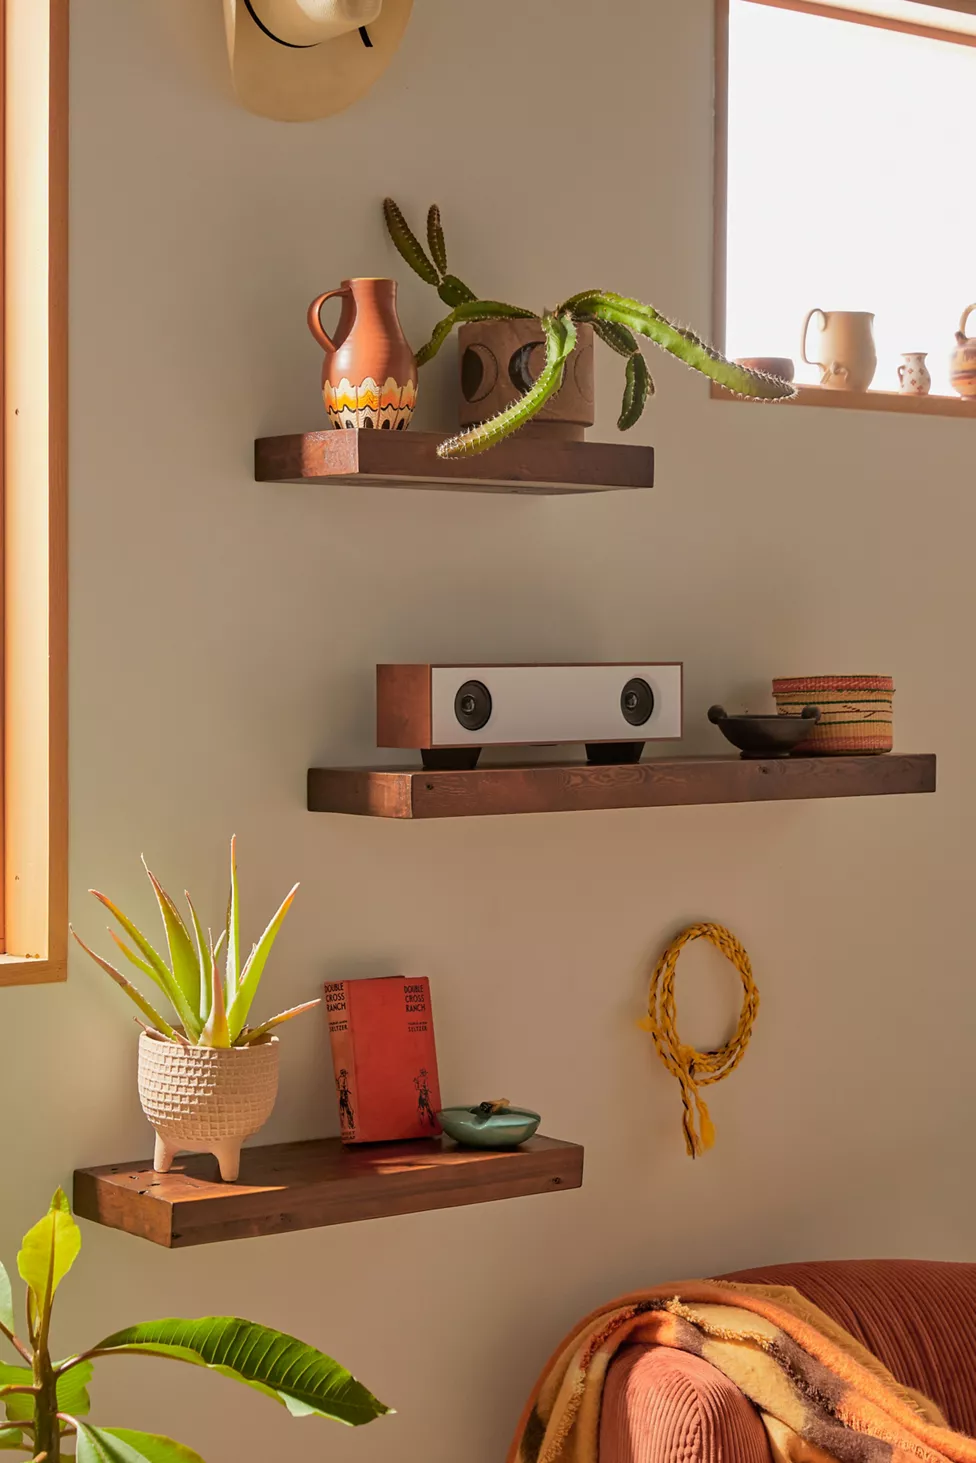 Install Floating Wall Shelves